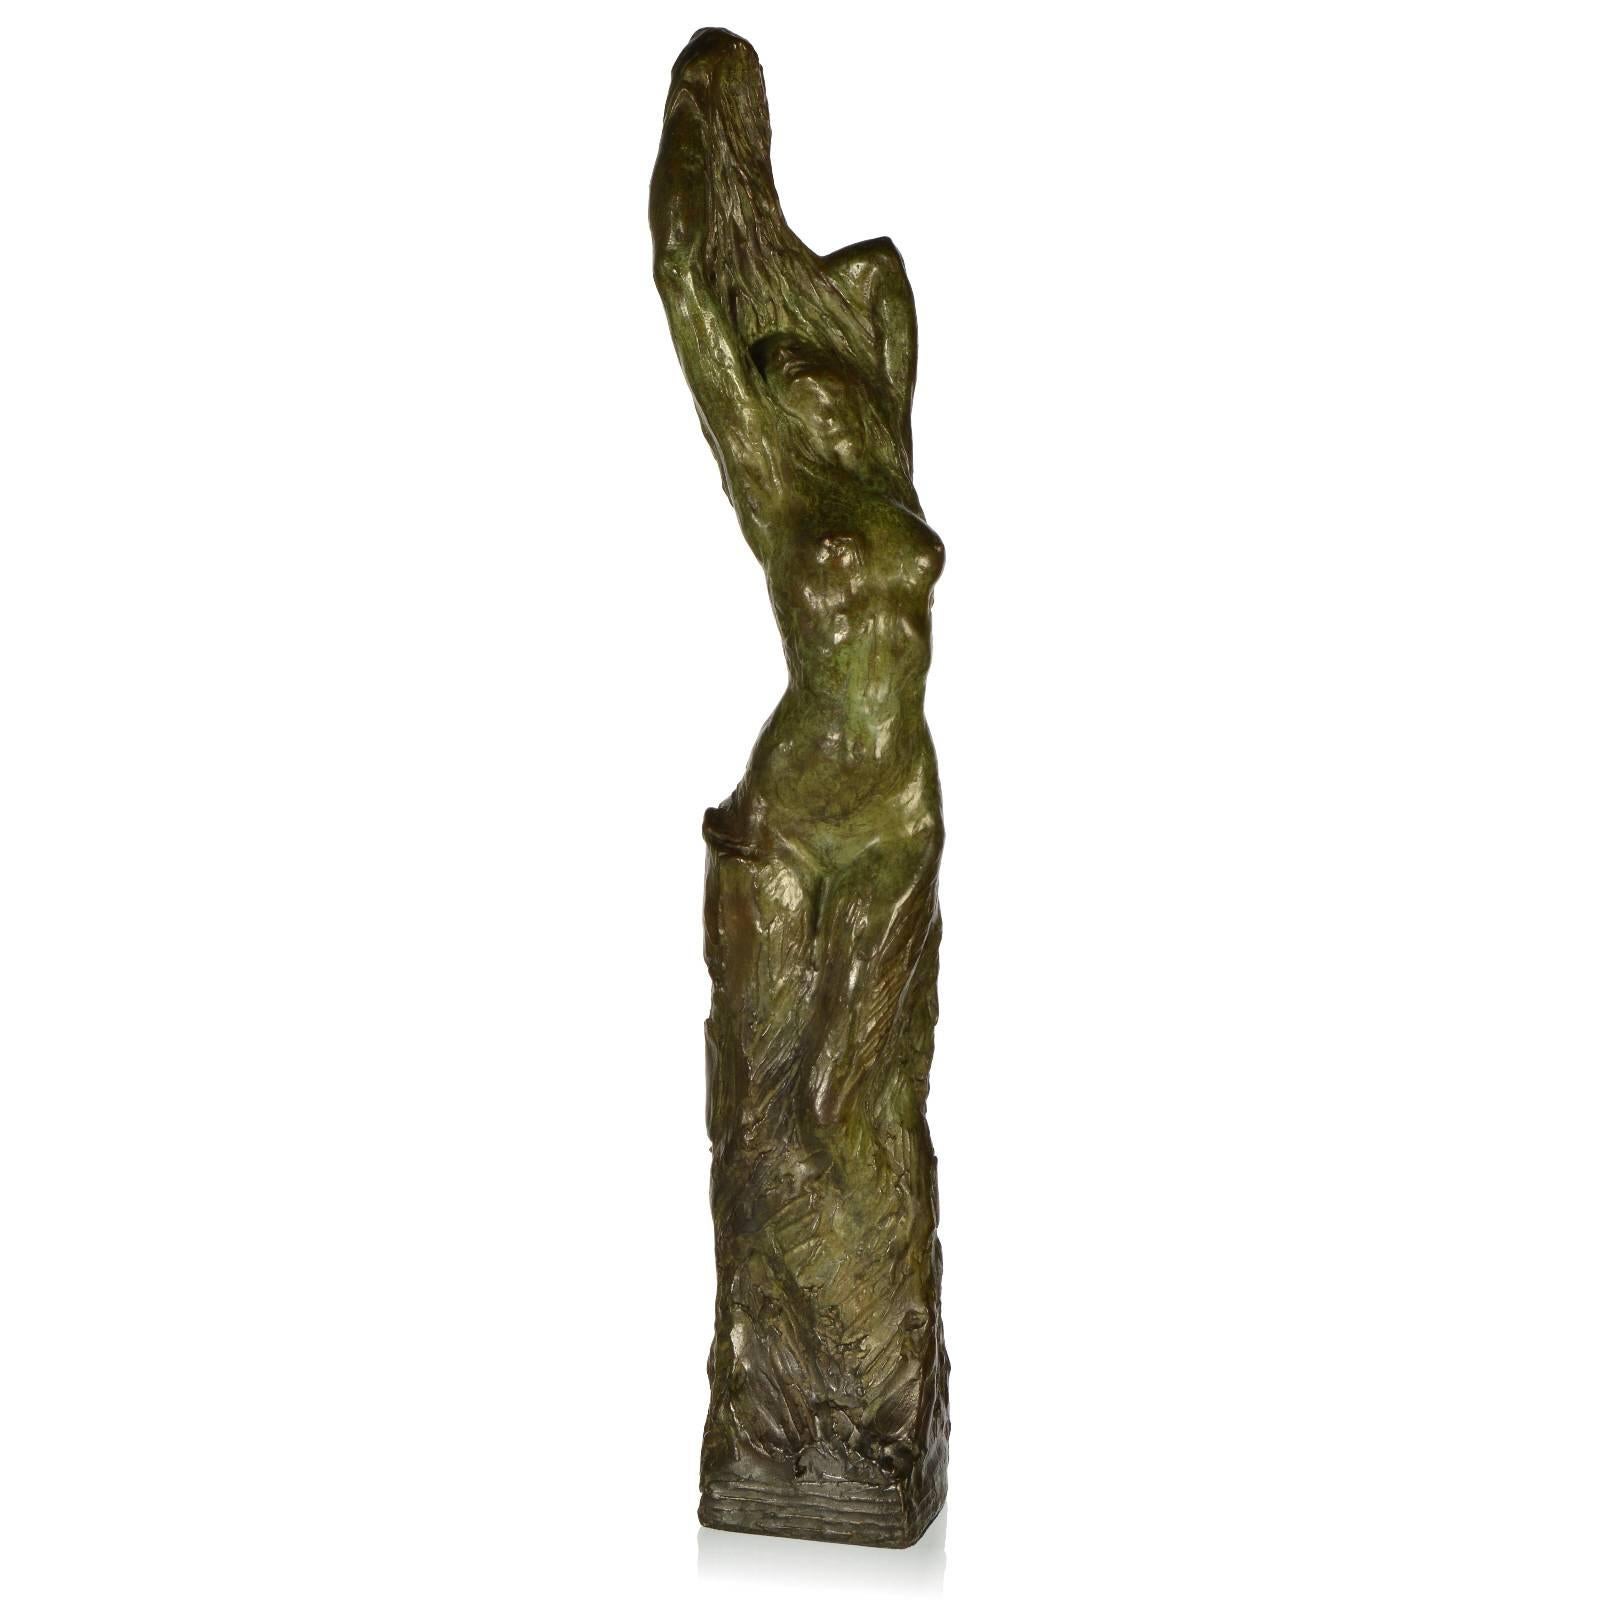 GALATHEA by Edouard Vereycken (Belgian, 1893-1967)

This exquisite bronze figure of a nude female is quite dramatic with its sensual yet mysterious appearance. This Art Deco Era piece is believed to be titled Galathea after Galatée / Galatea the sea